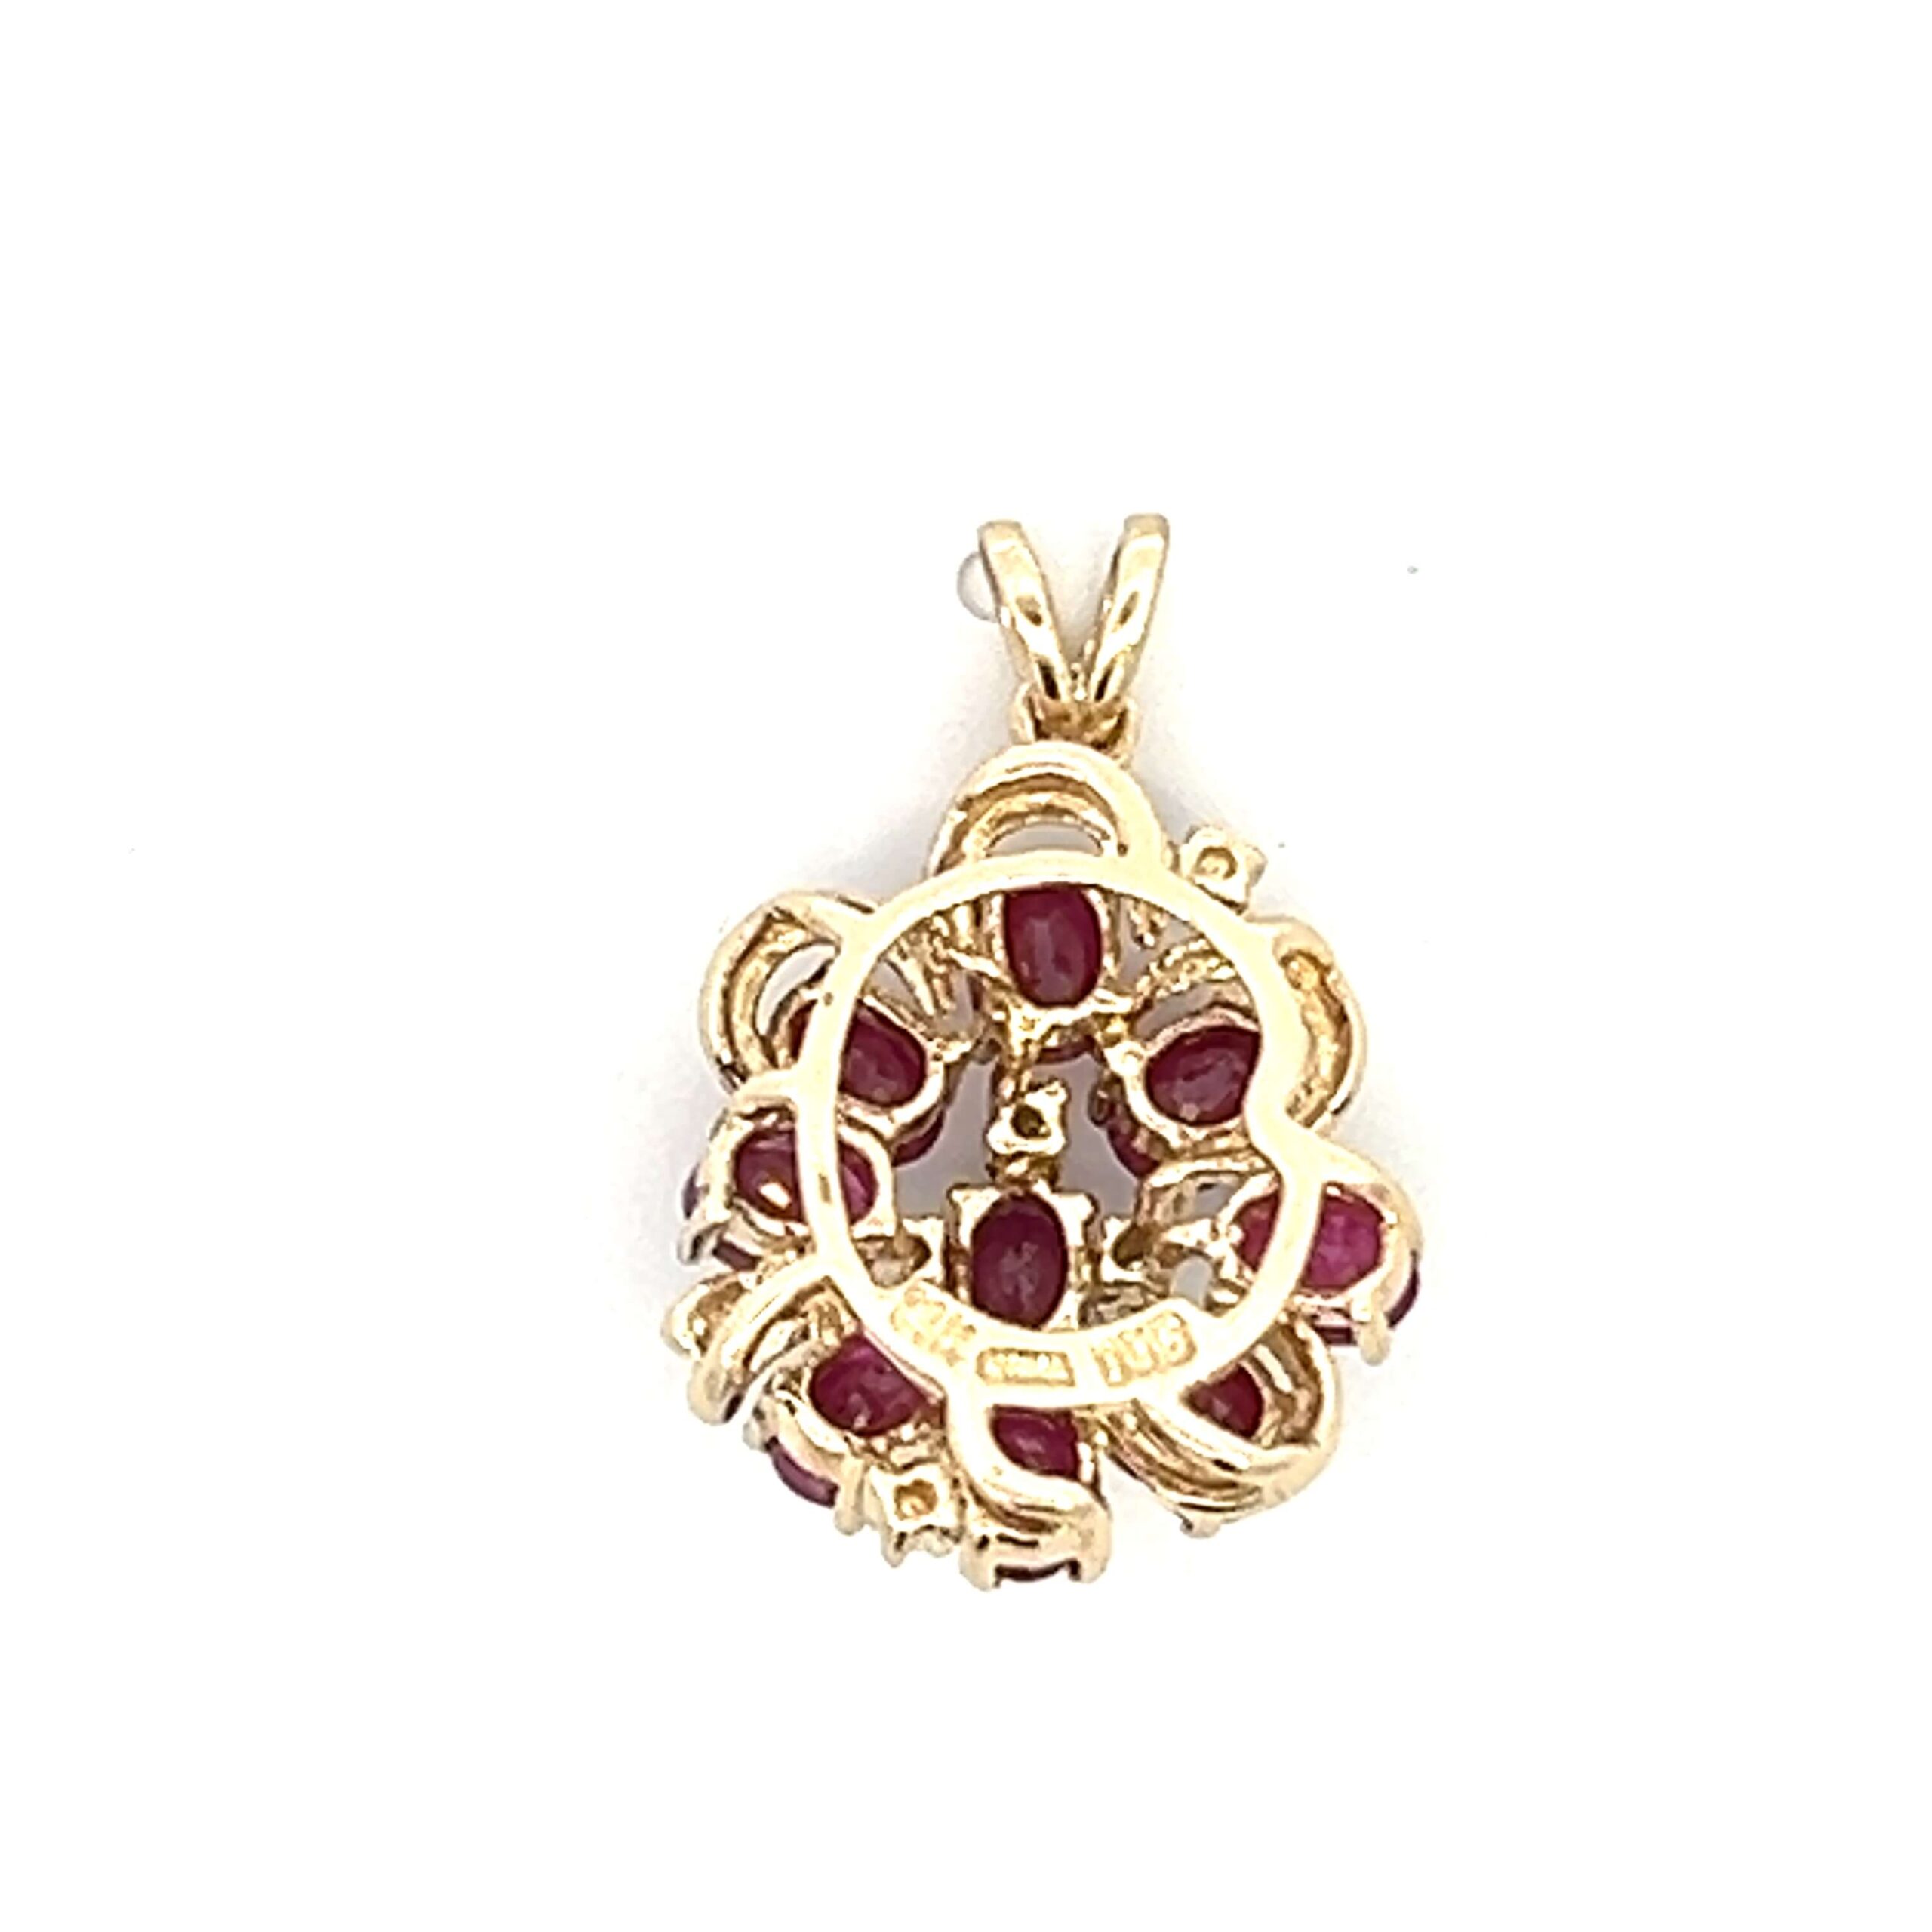 One estate 14 karat yellow gold cluster pendant set with 9 oval faceted rubies and 6 round brilliant diamond accents